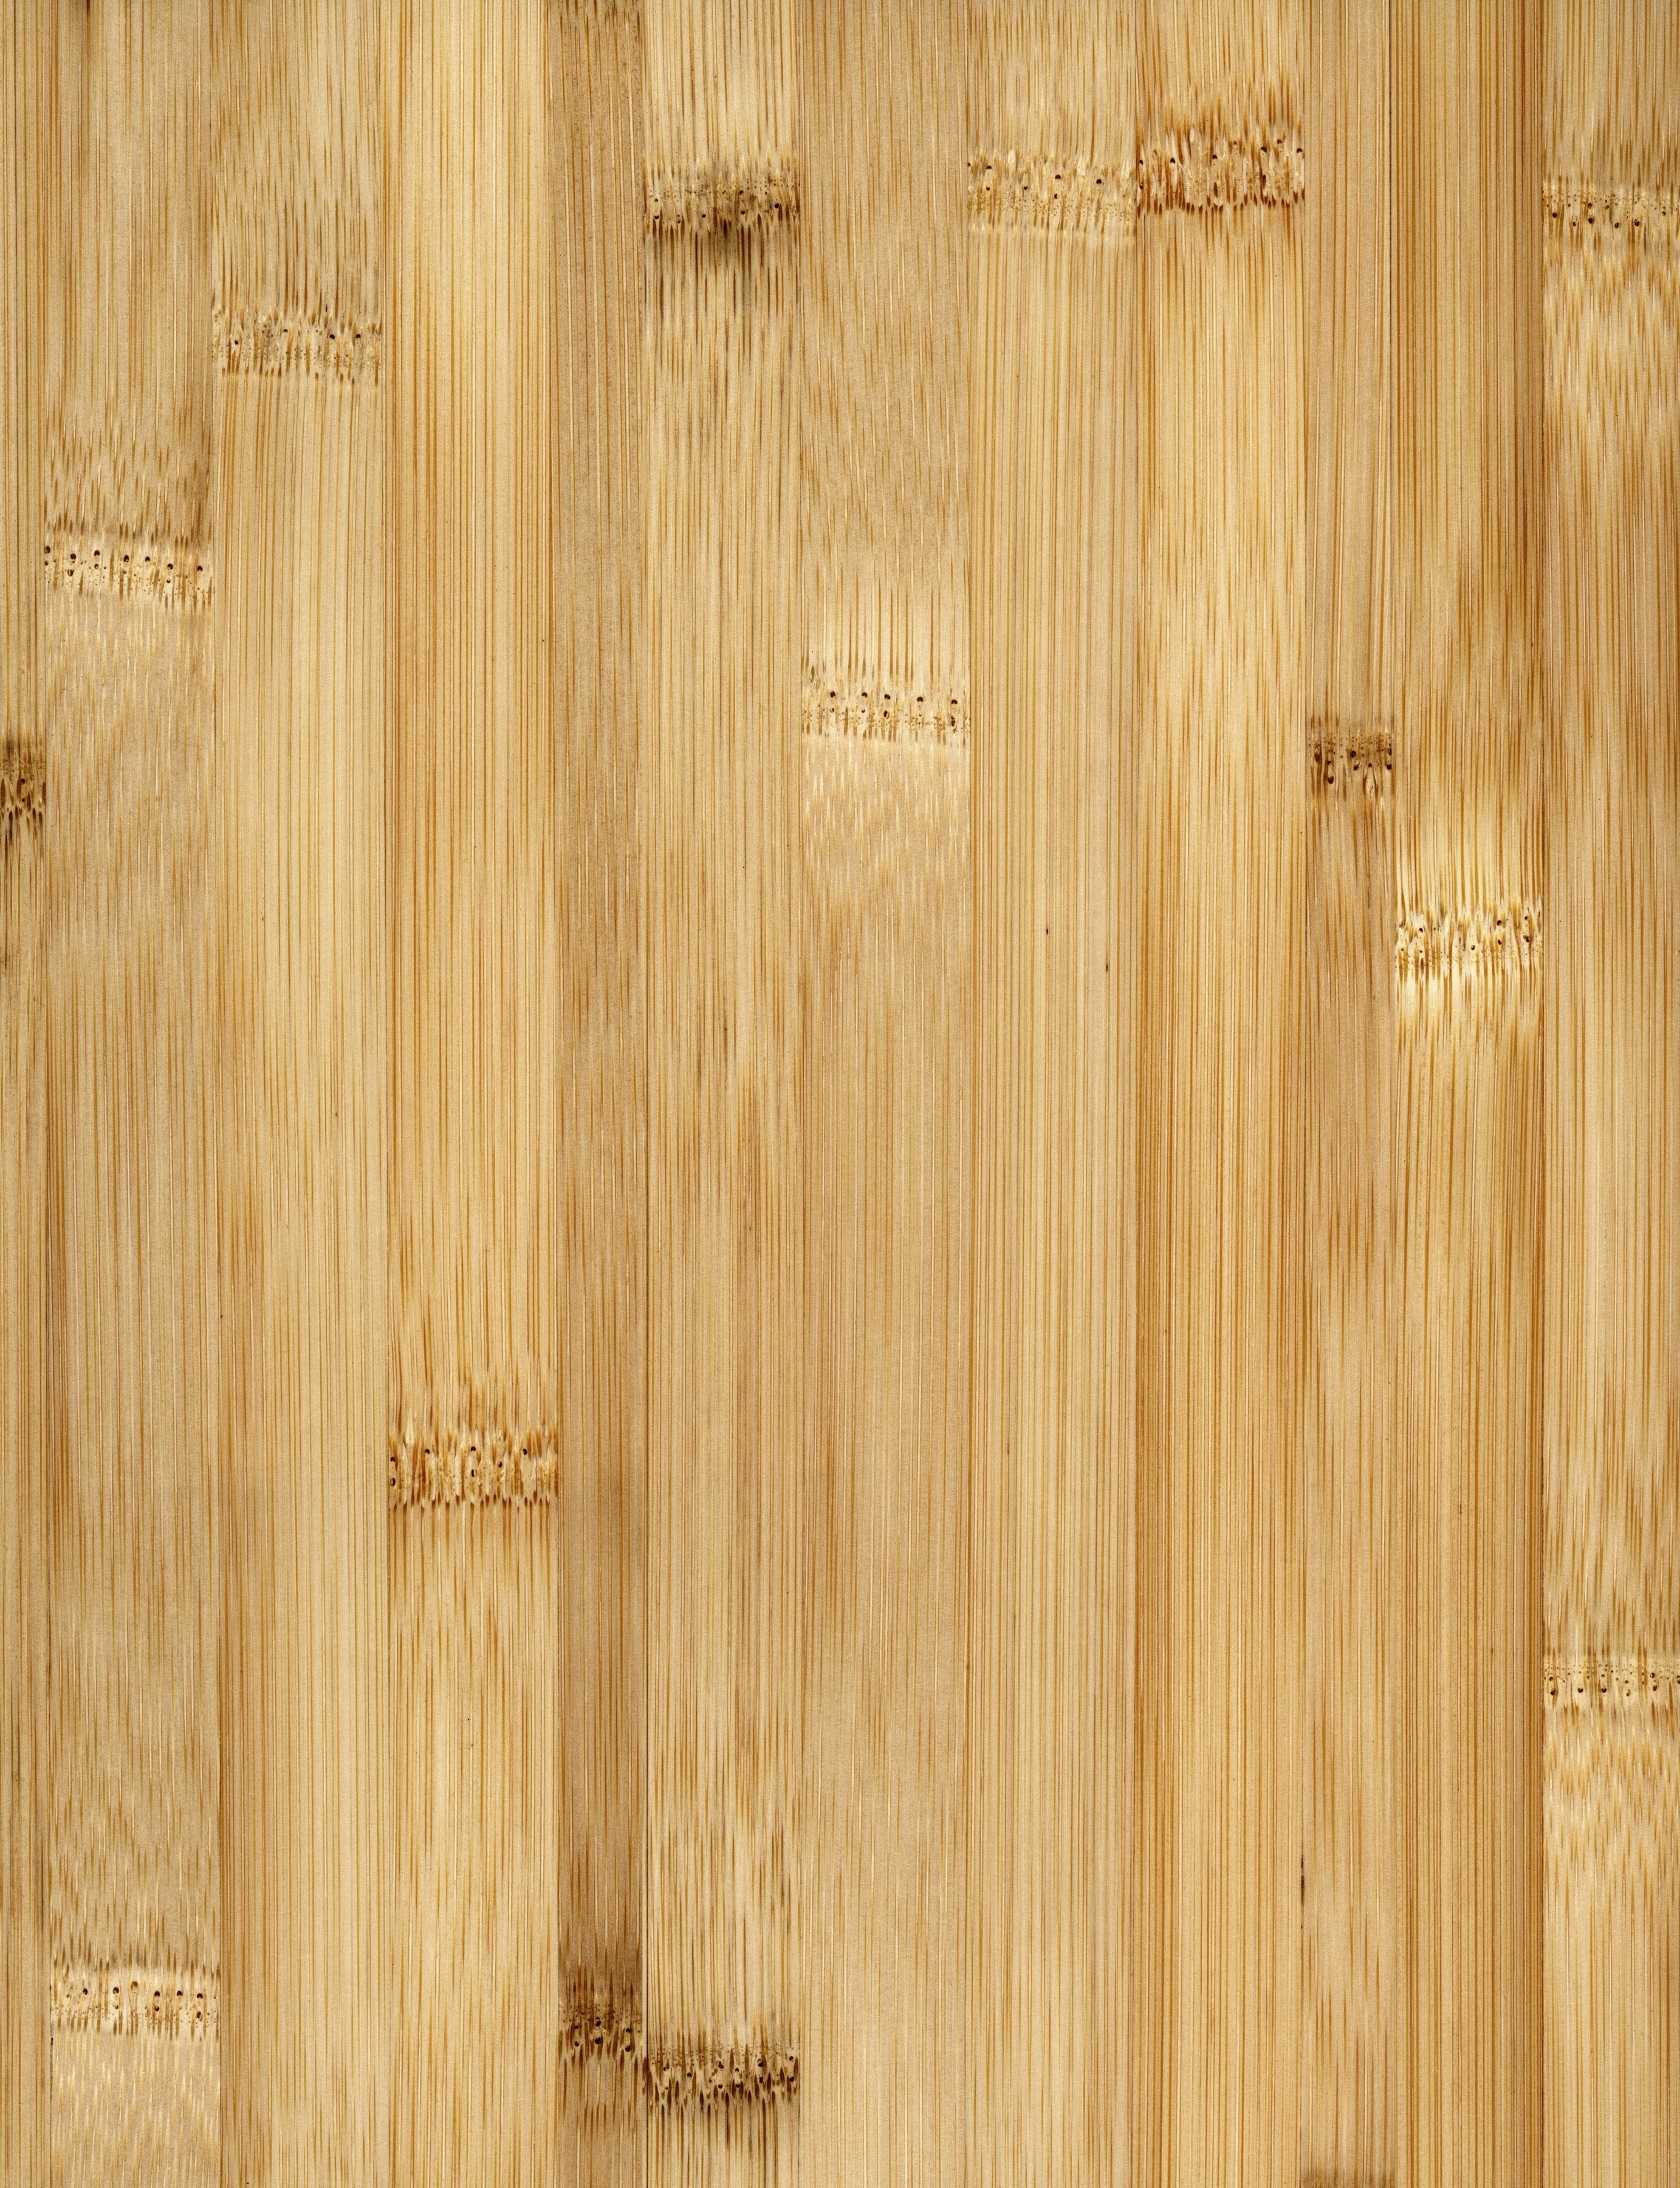 29 Nice Bamboo Hardwood Flooring Pros and Cons 2024 free download bamboo hardwood flooring pros and cons of bamboo flooring buying guide throughout bamboo floor full frame 200266305 001 59a4517bd963ac00118a3d9f